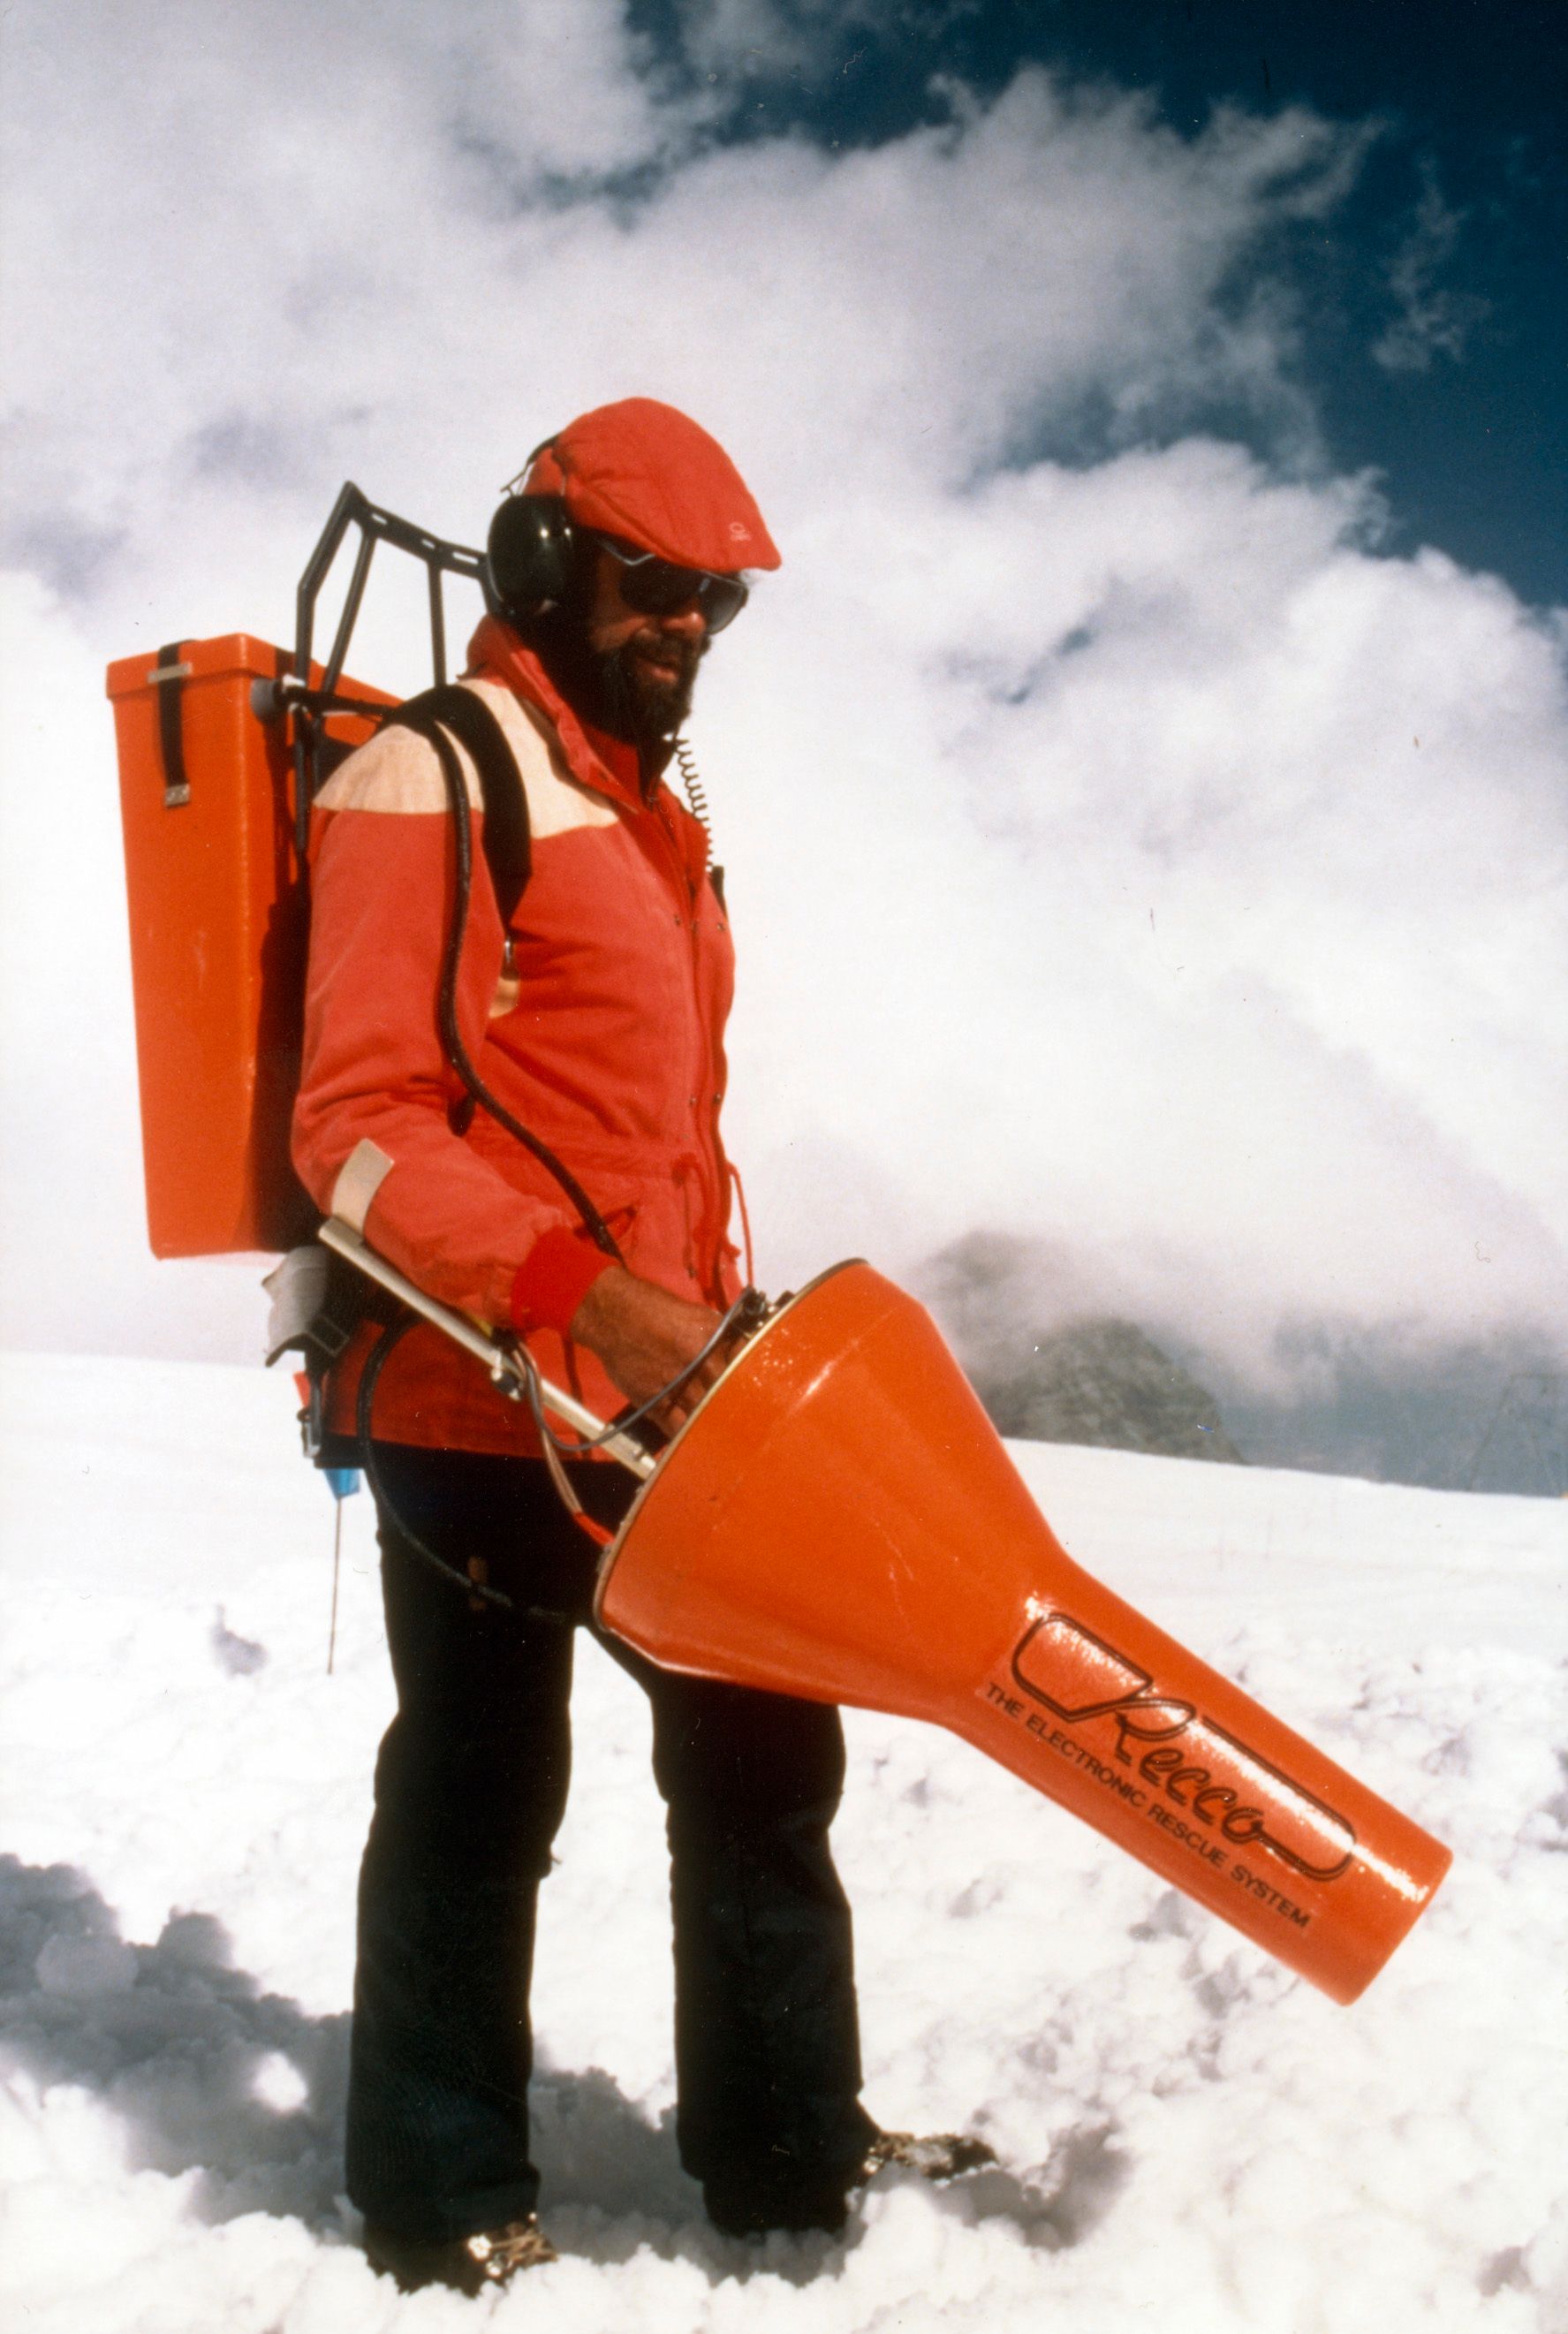 The beginning, Zermatt 1983, Bruno Jelk head of mountain rescue holding the RECCO R1, first generation of detectors.